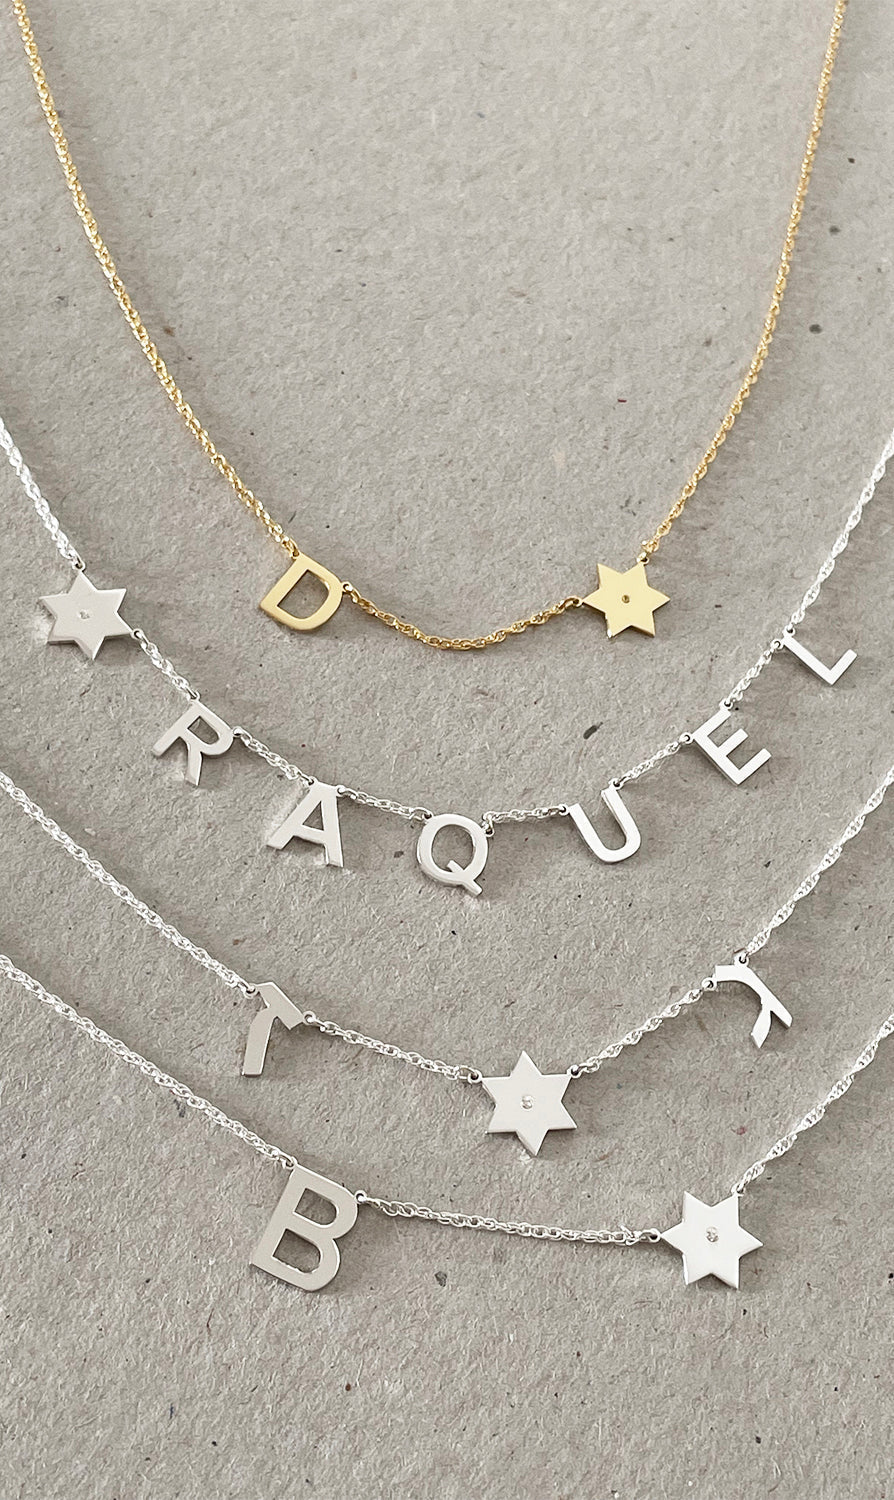 Taly Initials and Star of David Diamond Necklace